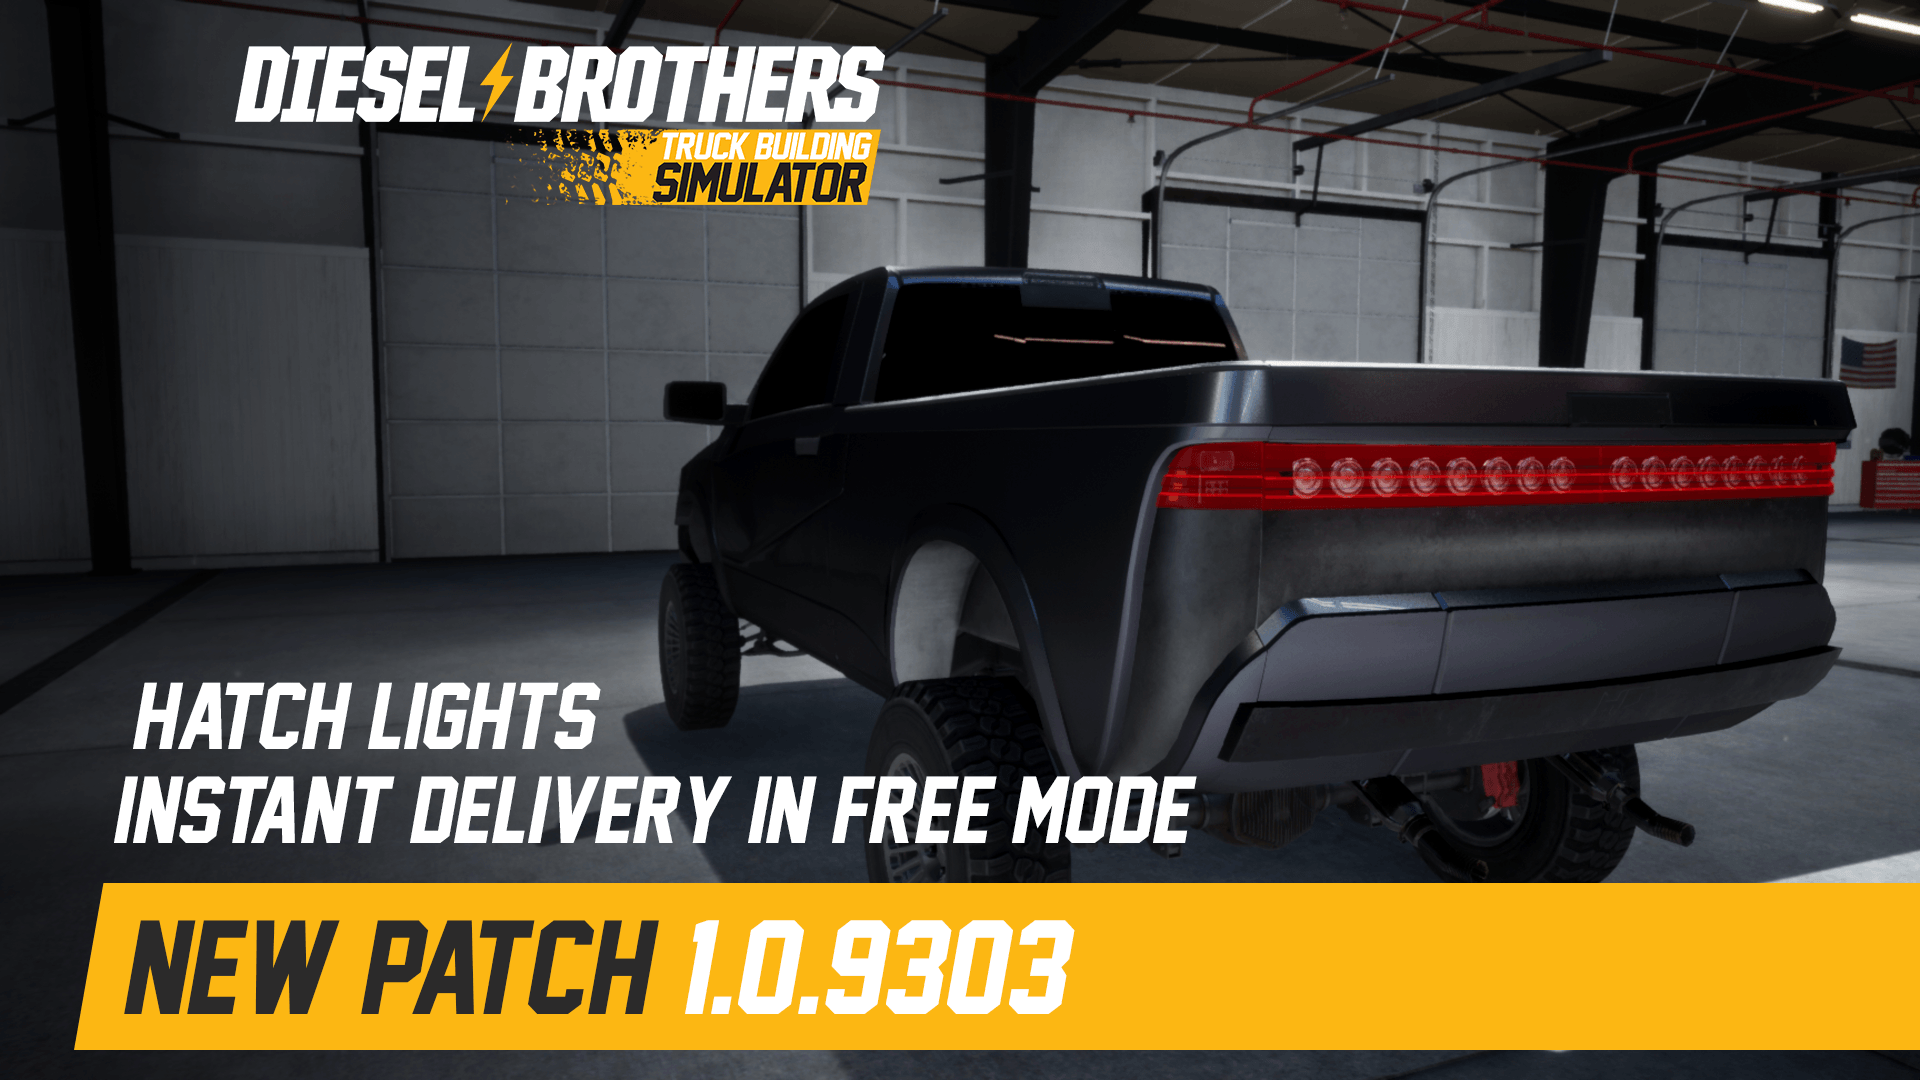 Diesel Brothers: Truck Building Simulator update for May 2019